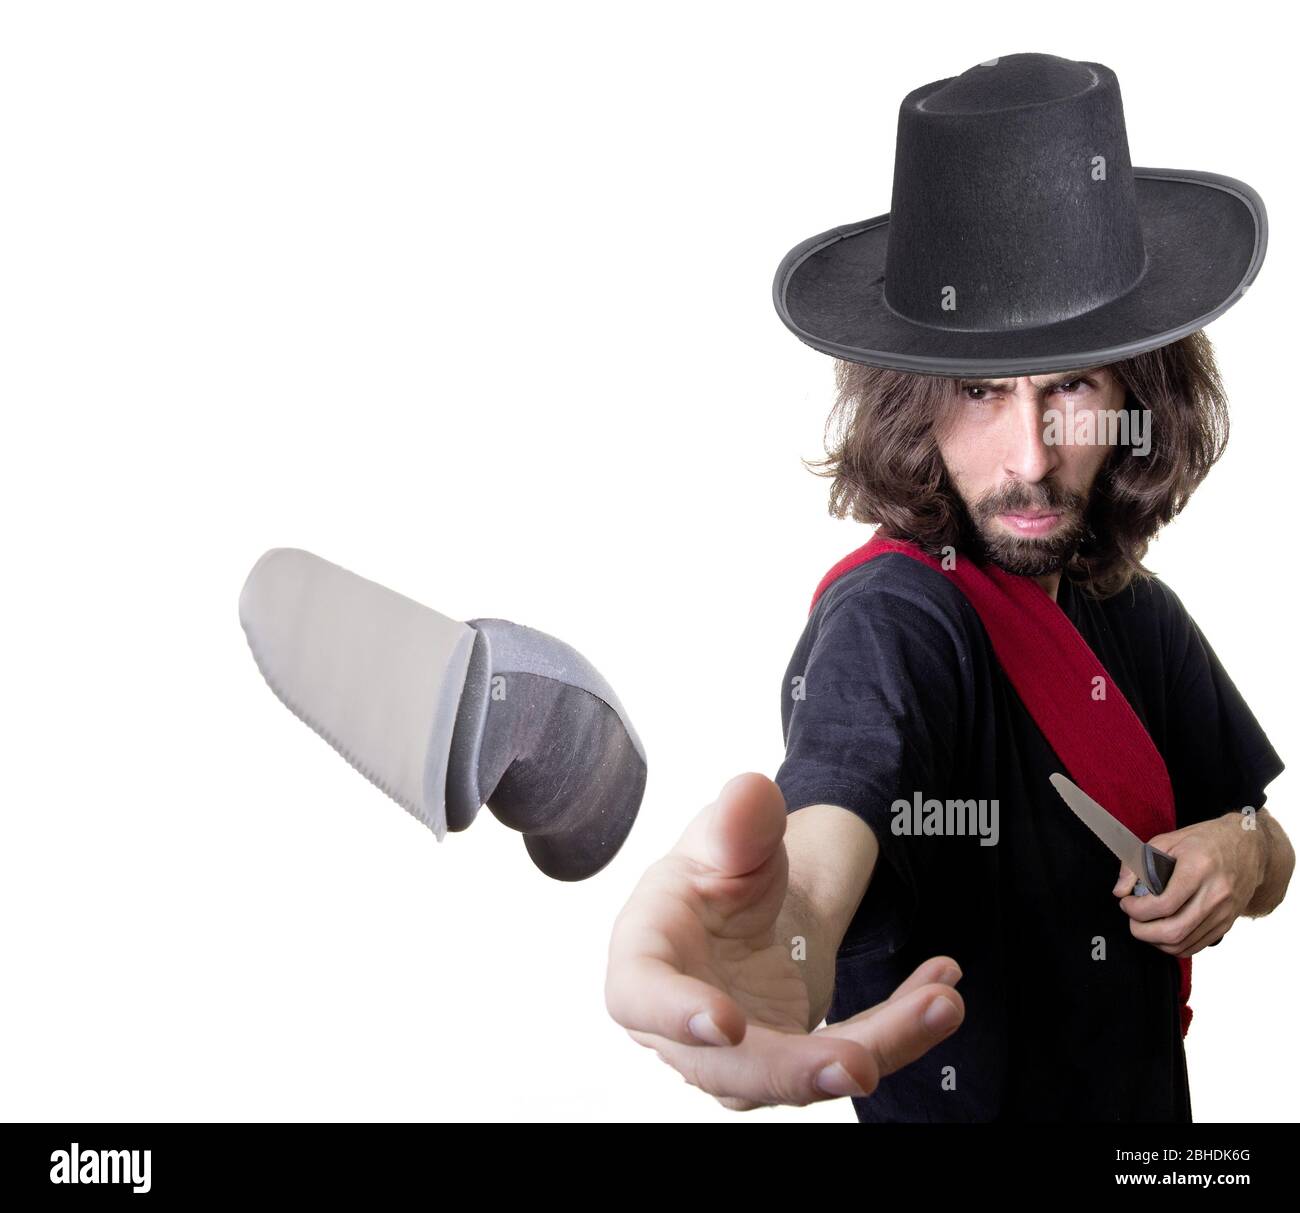 a knife thrower with long hair Stock Photo